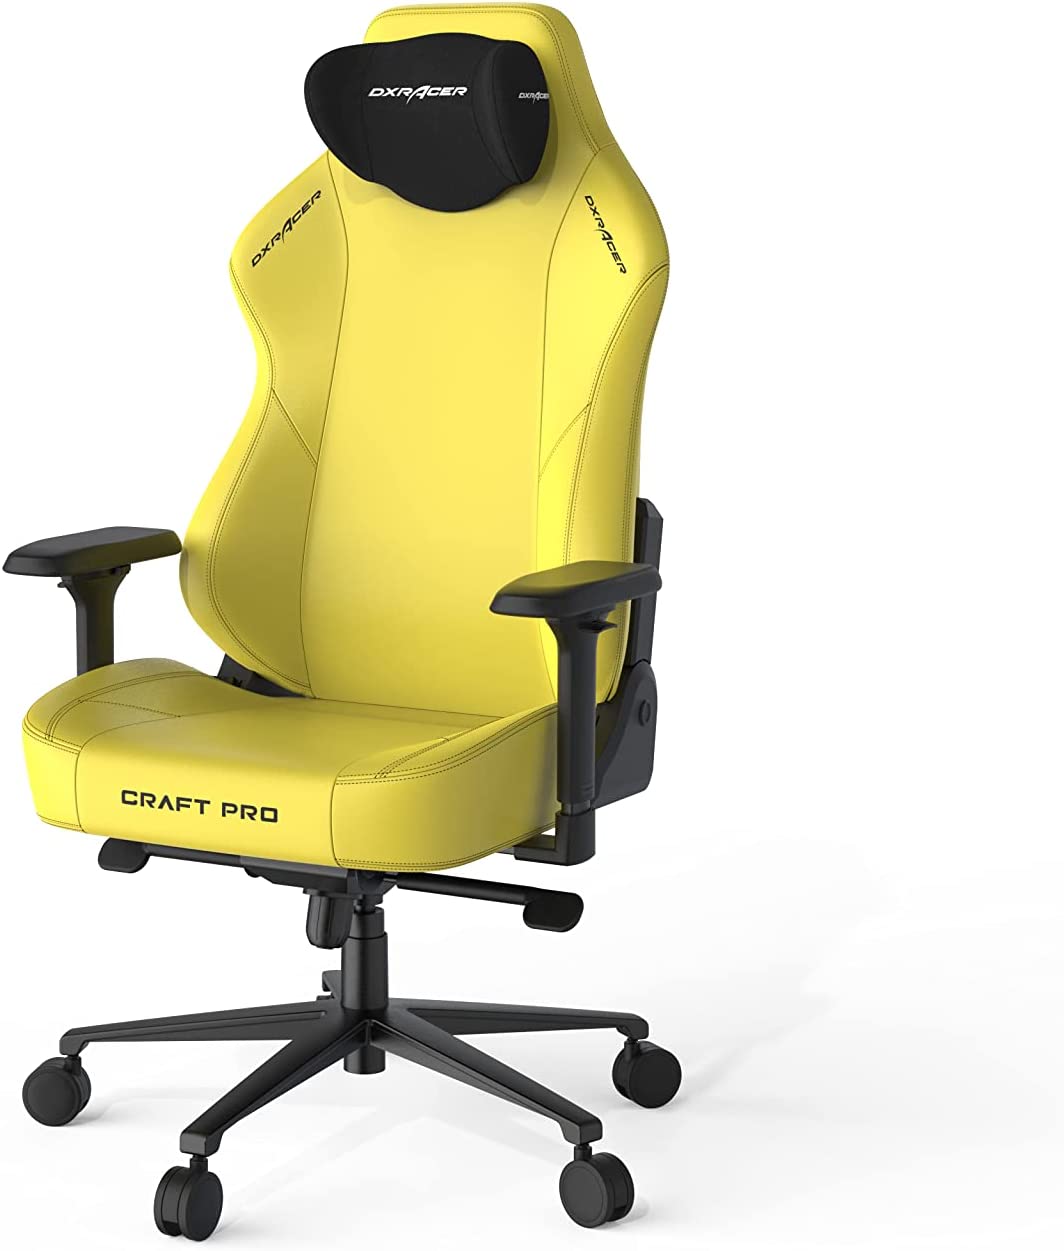 DXRacer Craft Pro Classic Gaming Chair, Adjustable Armrests, Memory Foam Headrest - Yellow